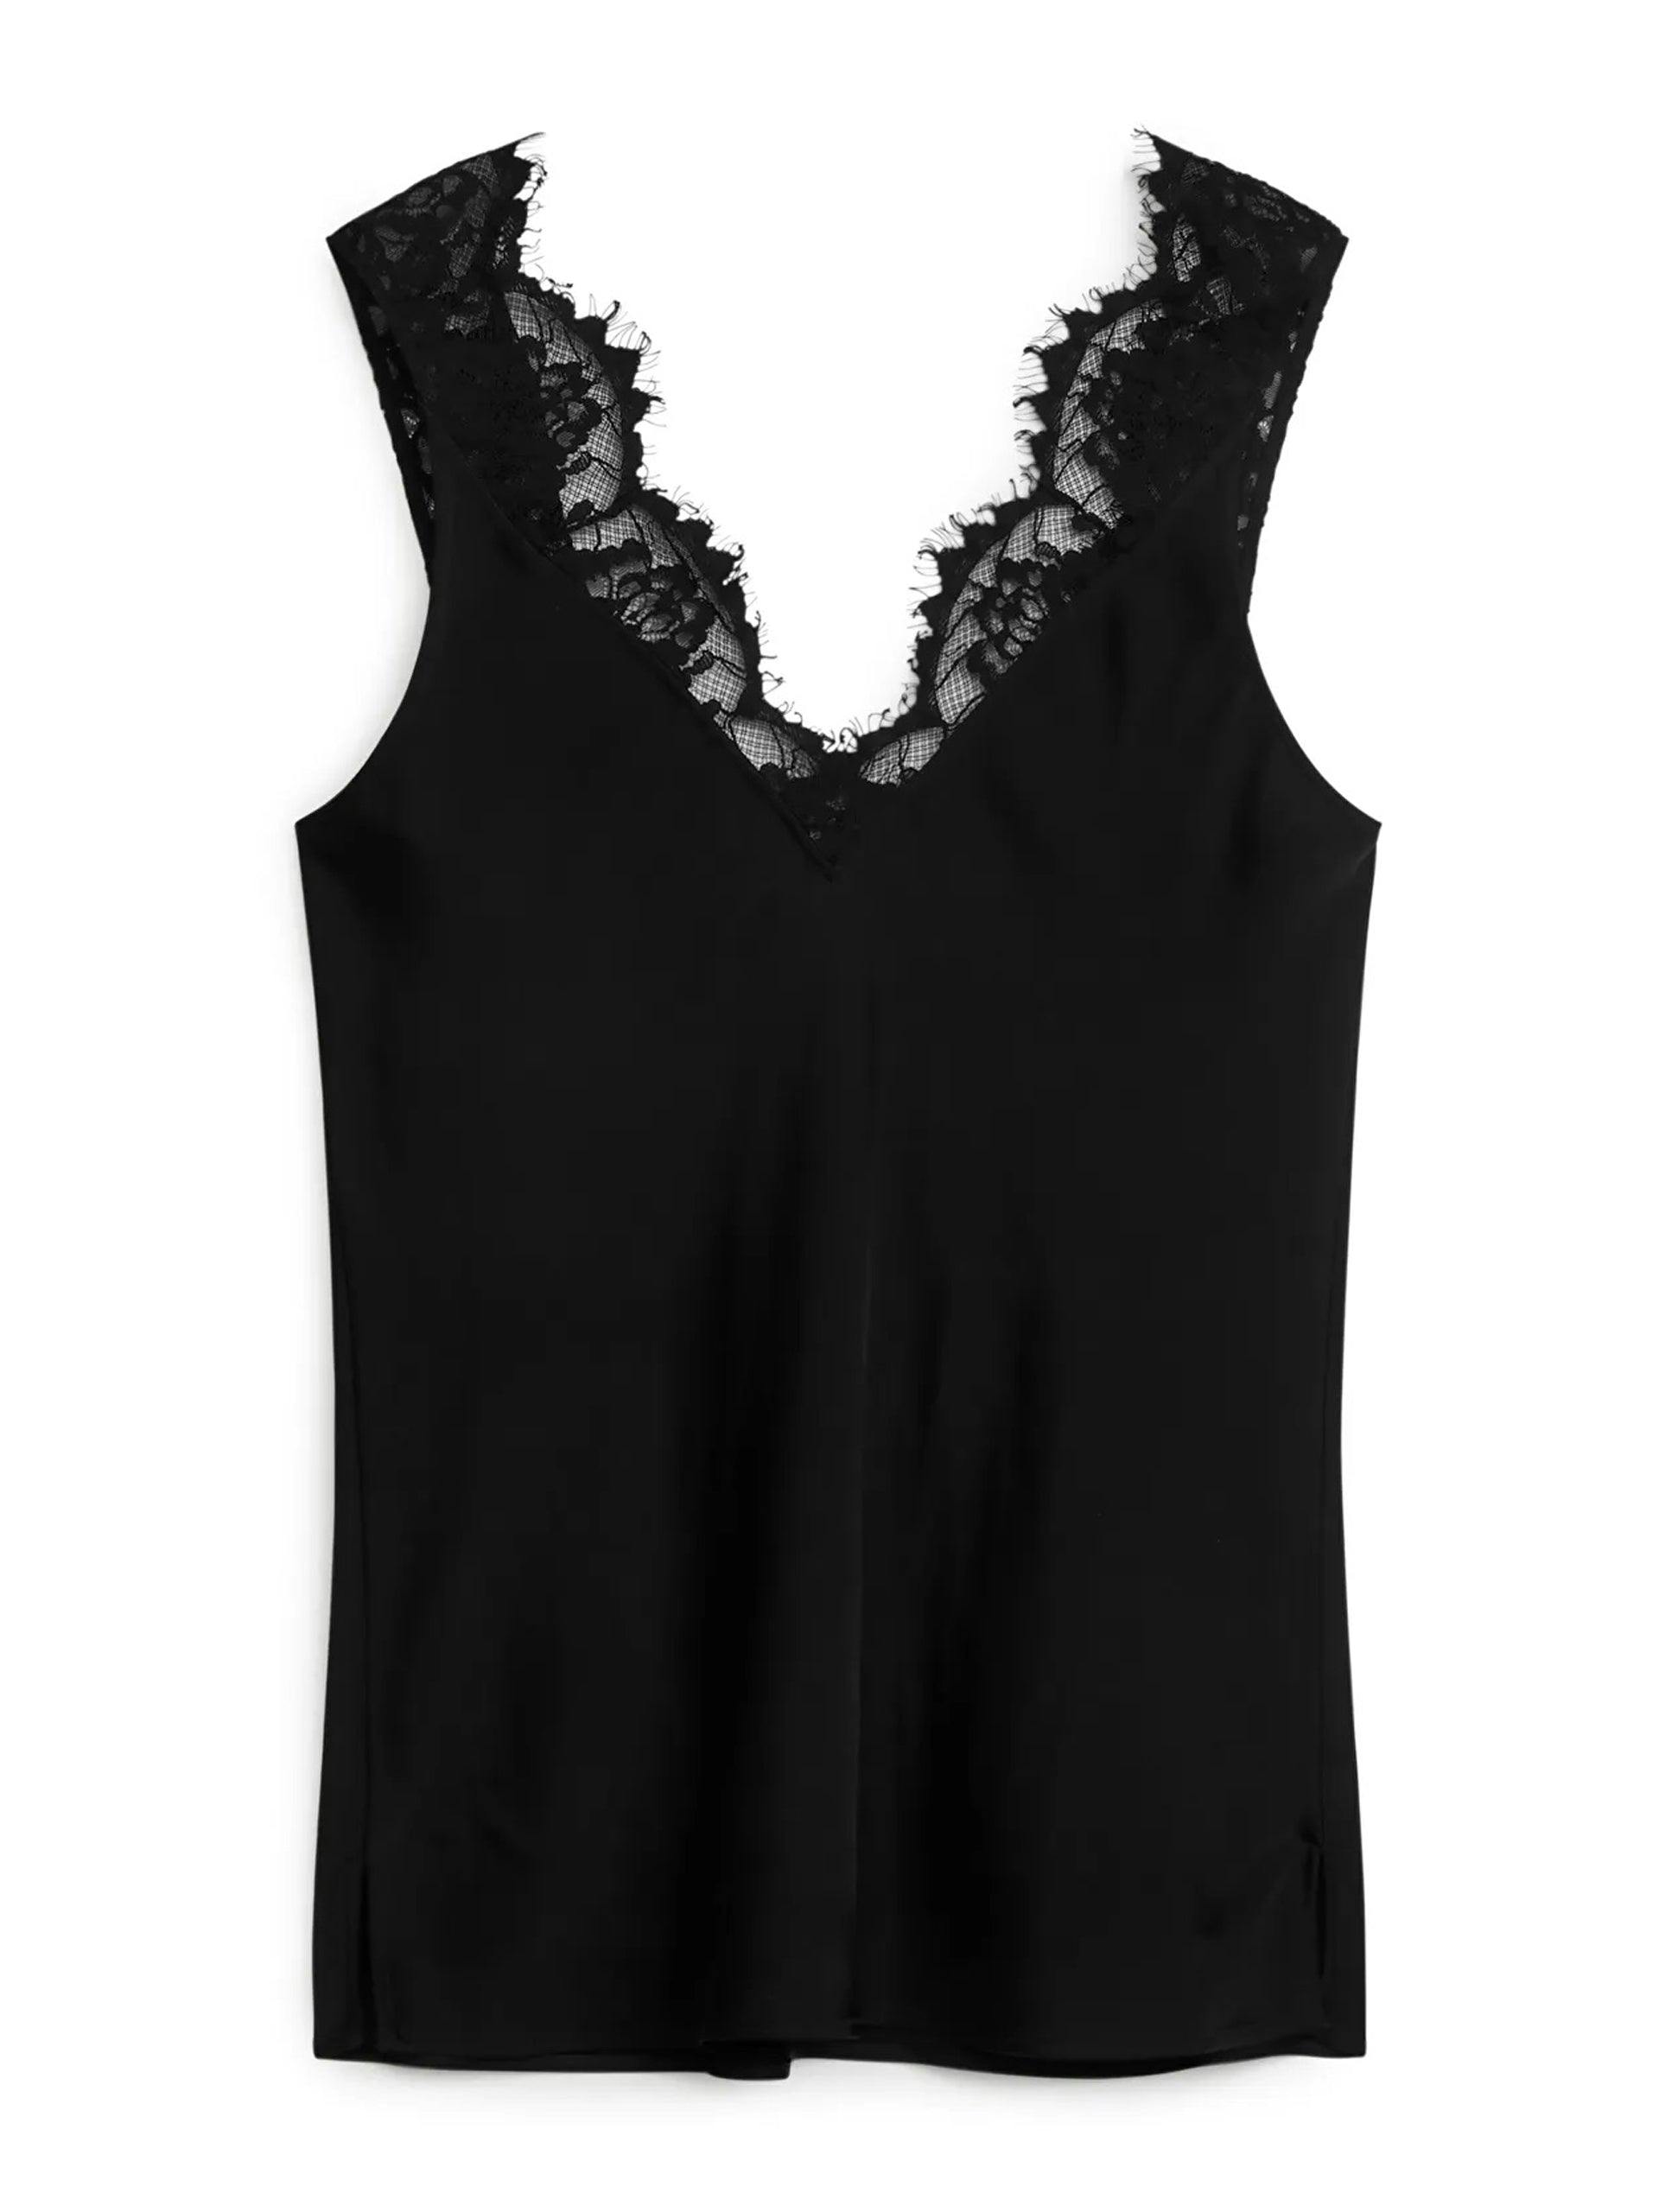 Black top with lace detail